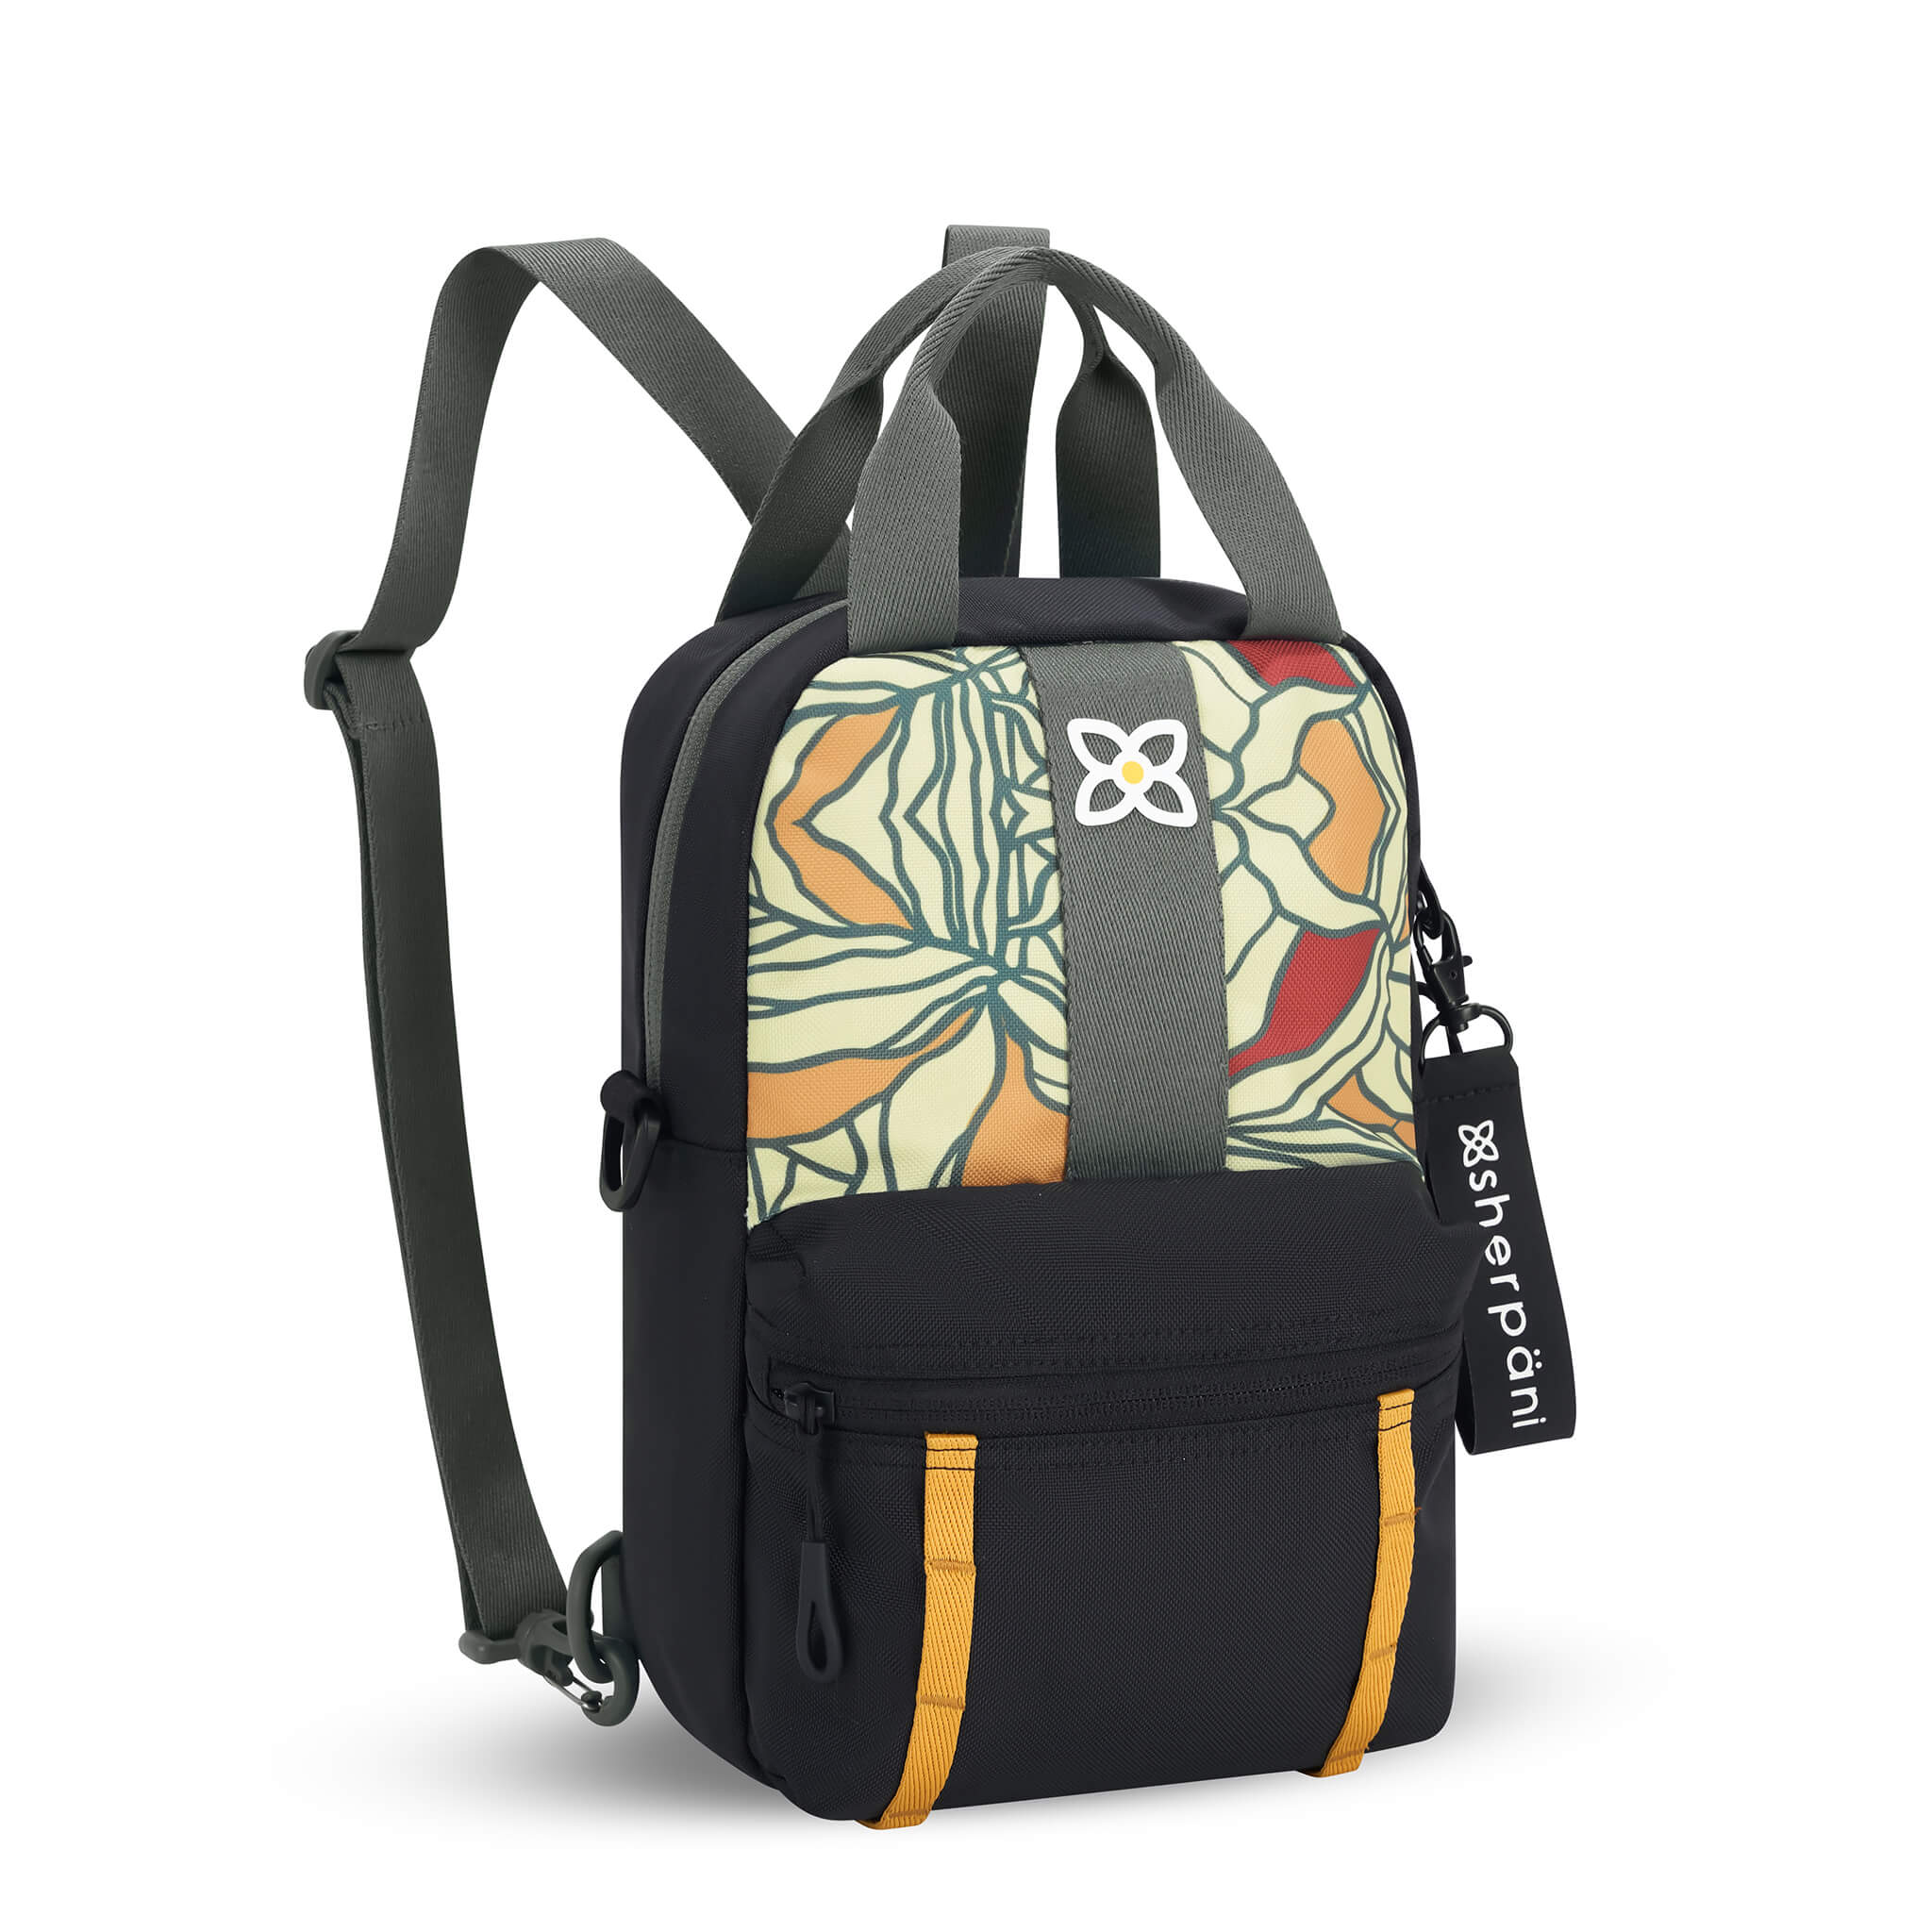 Angled front view of Sherpani mini backpack the Logan in Fiori. The bag is black and gray with an accented daisy chain in yellow. The front panel features a multi-colored floral pattern. The Logan has fixed tote handles and adjustable backpack straps. #color_fiori